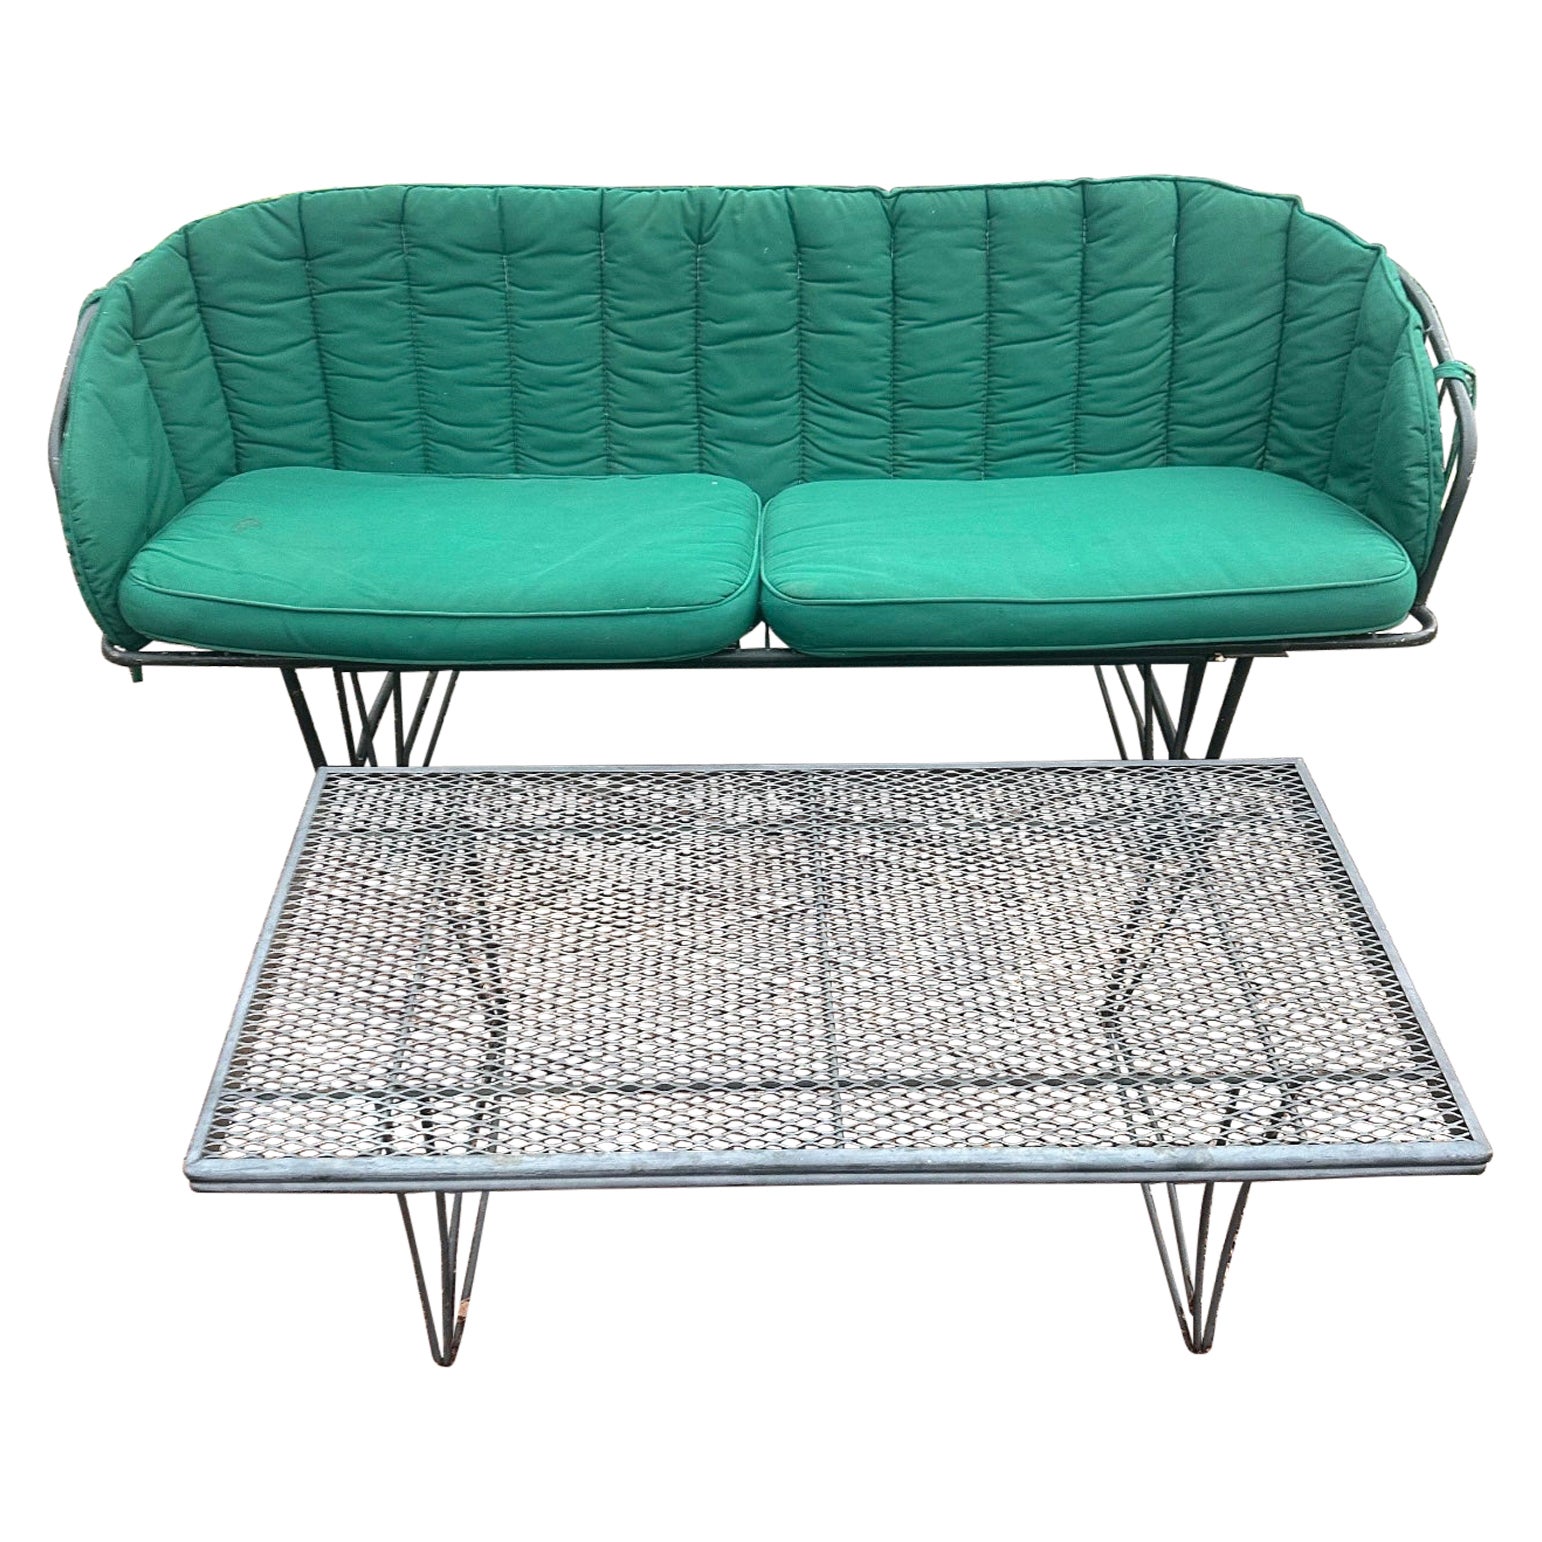 Homecrest Grenada loveseat Glider with cushions  and coffee table, Circa 1960’s For Sale